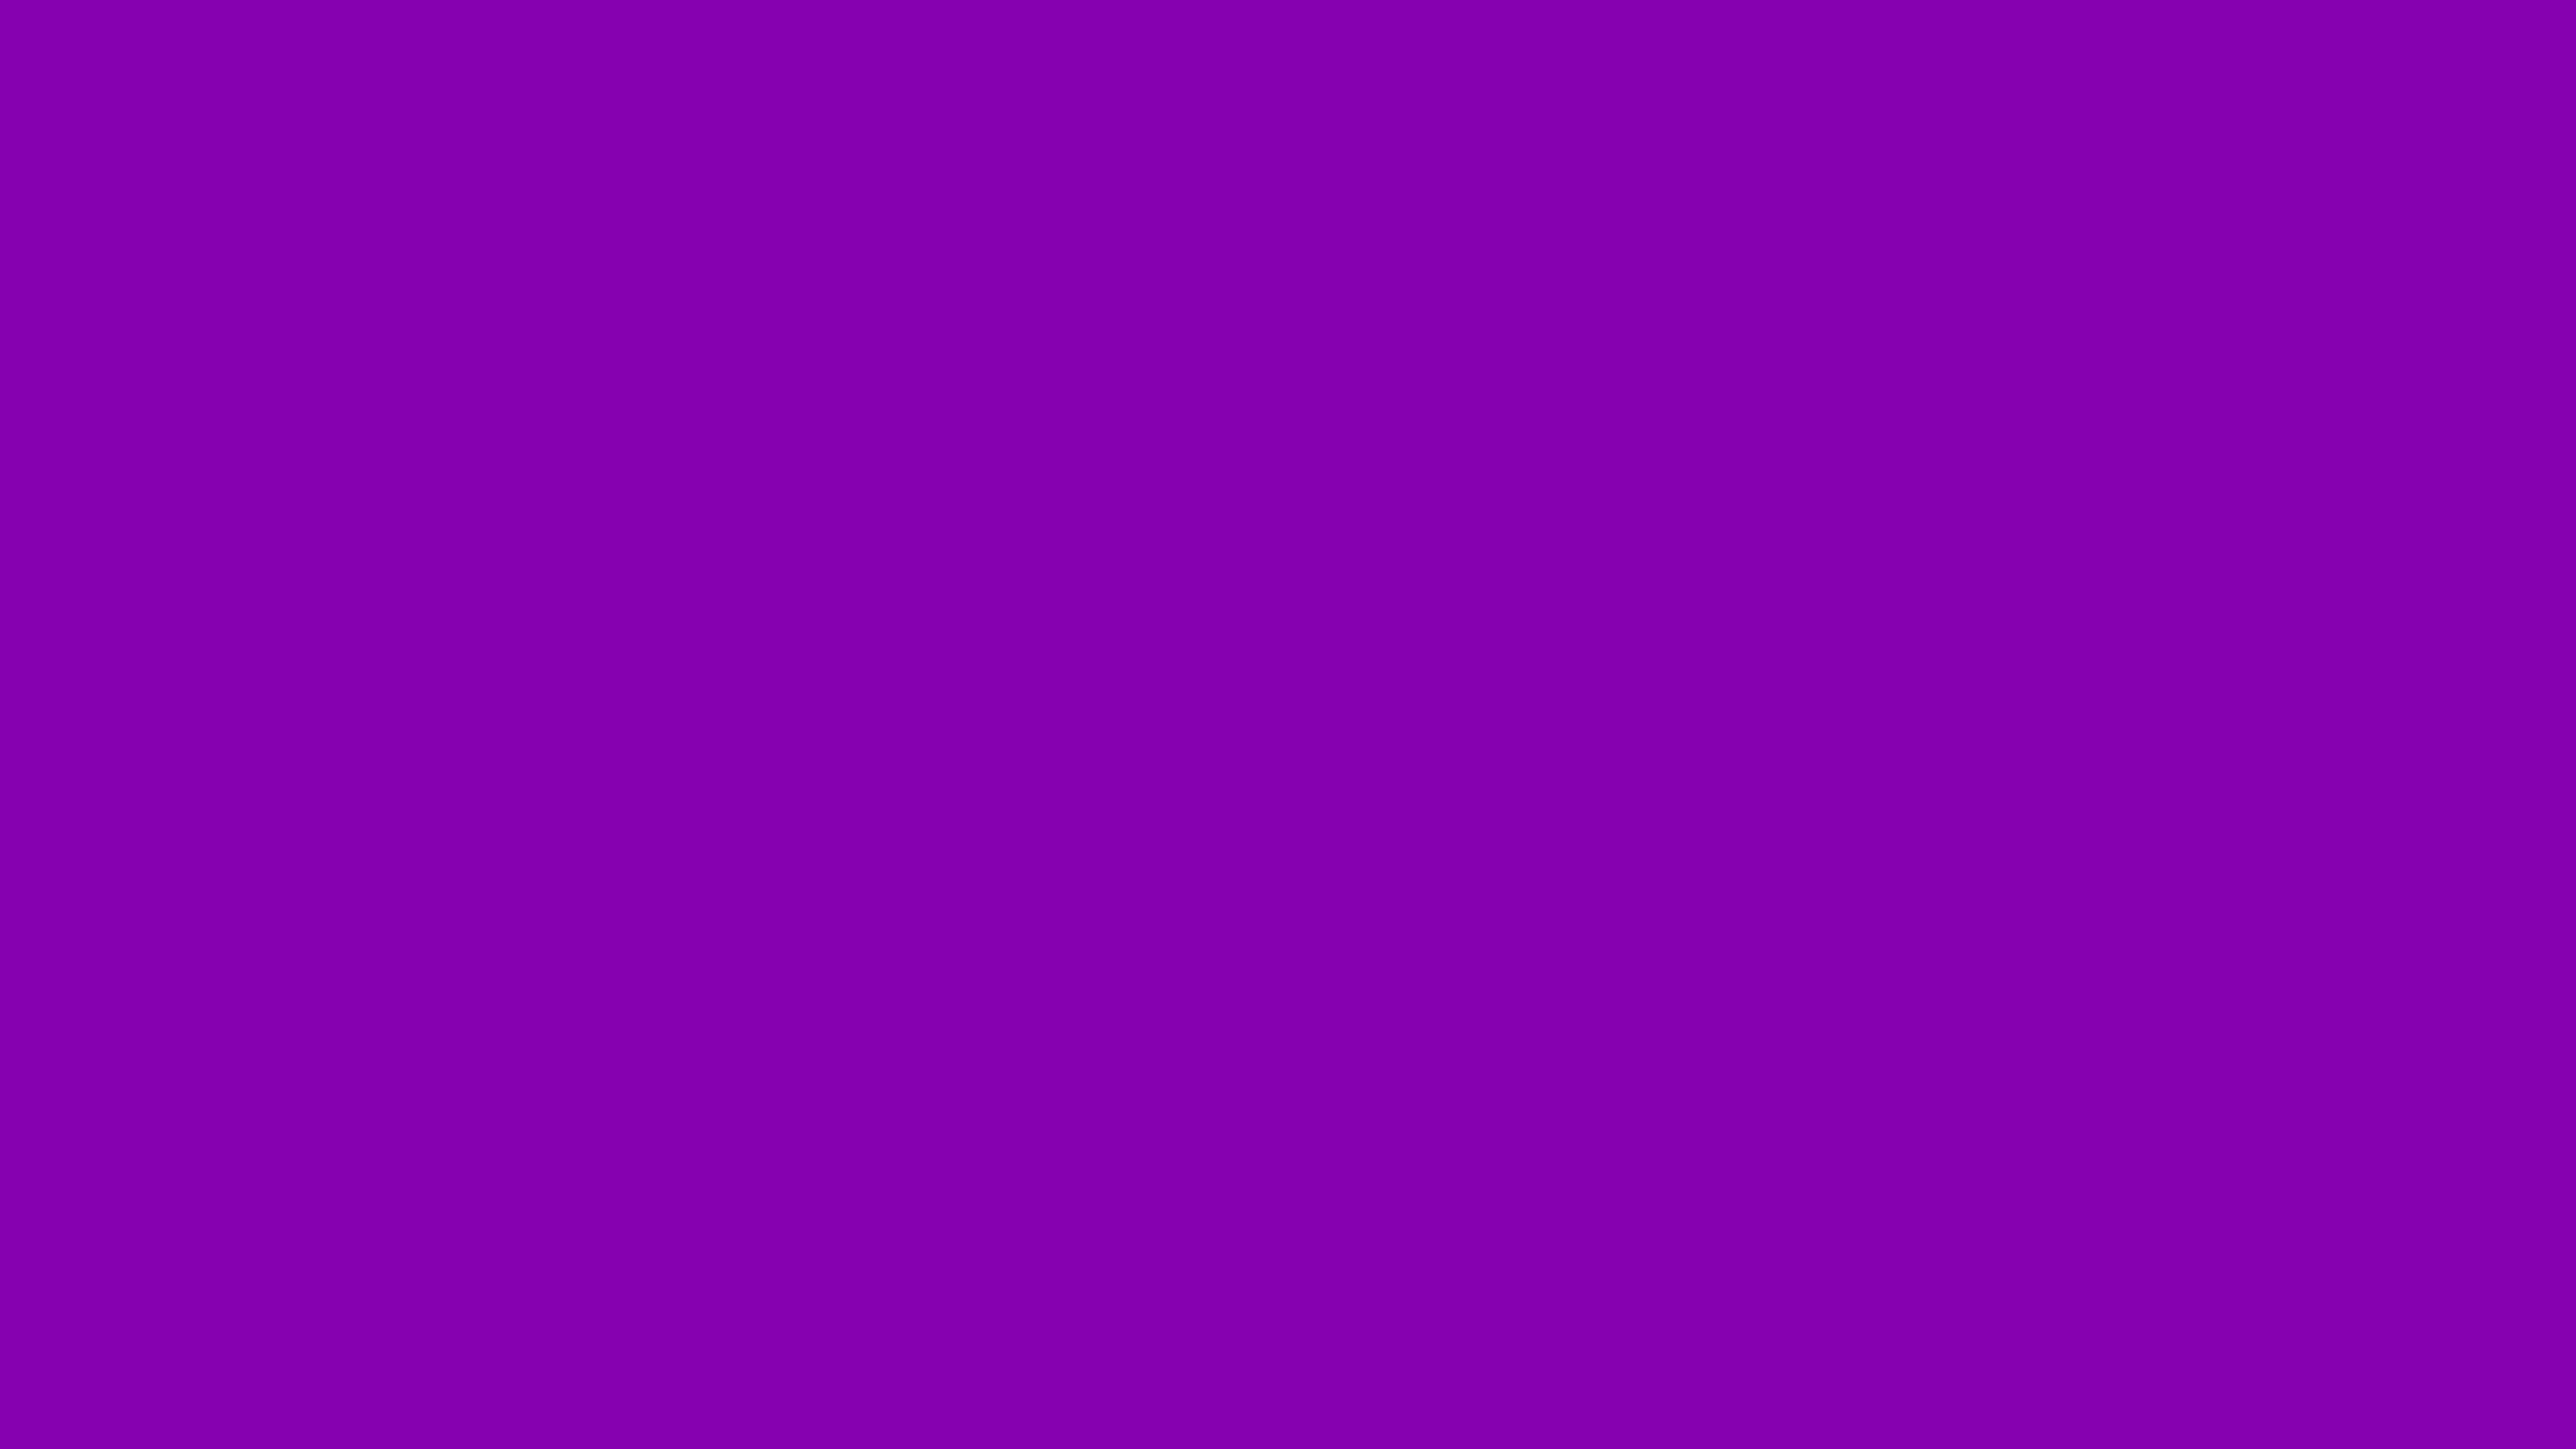 7680x4320 Violet RYB Solid Color Background